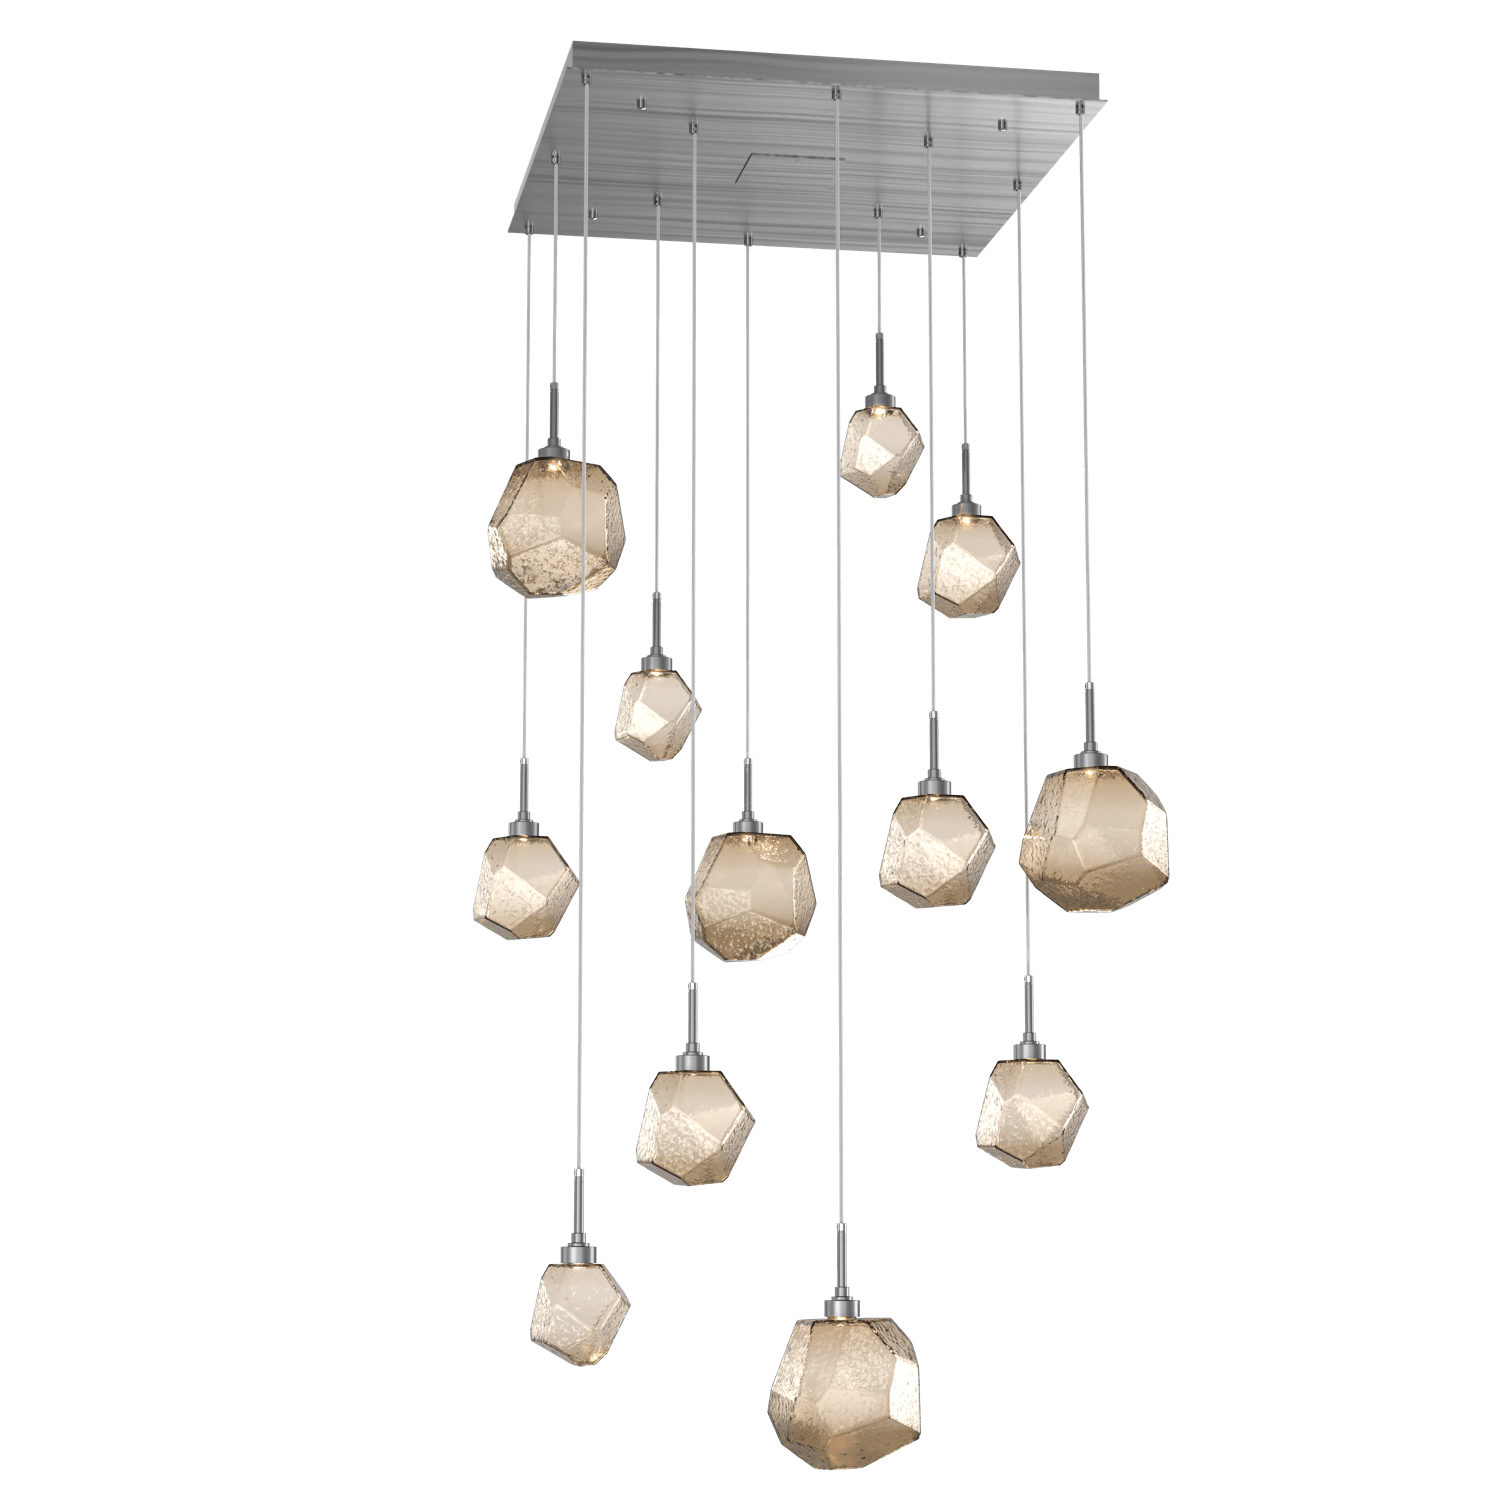 CHB0039-12-GM-B-Hammerton-Studio-Gem-12-light-square-pendant-chandelier-with-gunmetal-finish-and-bronze-blown-glass-shades-and-LED-lamping